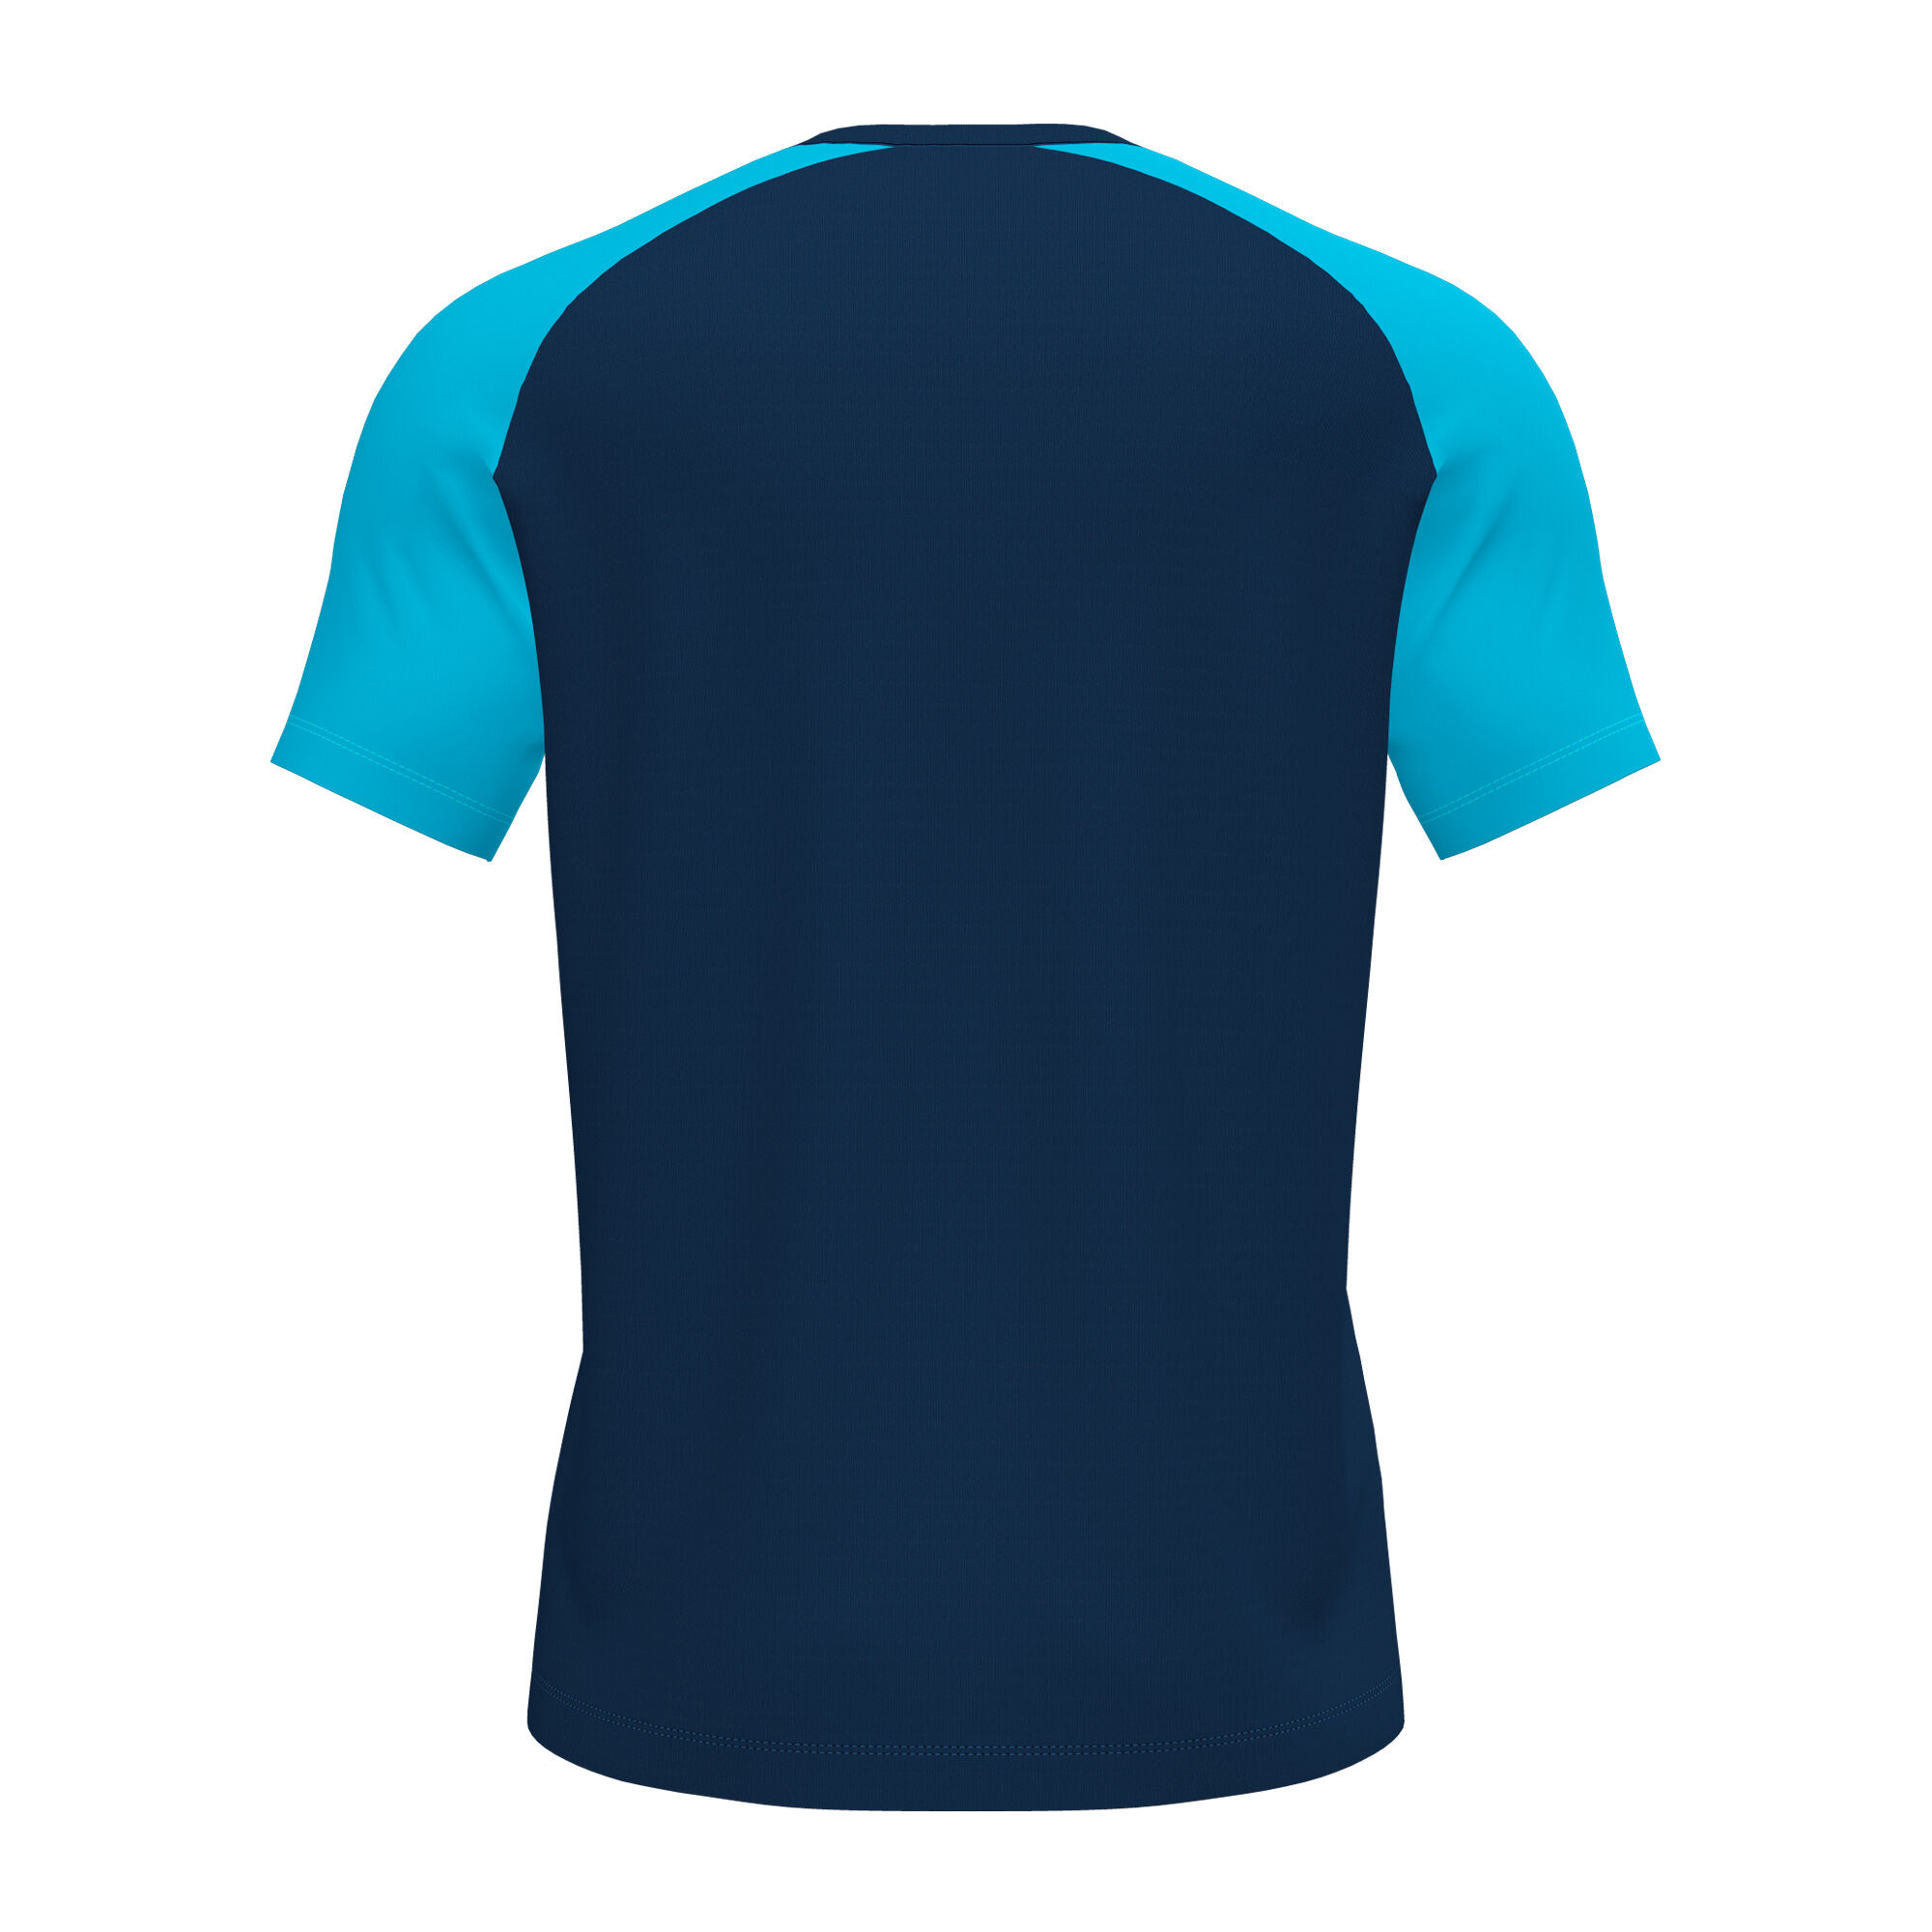 MAILLOT MANCHES COURTES HOMME ACADEMY IV BLEU MARINE TURQUOISE FLUO